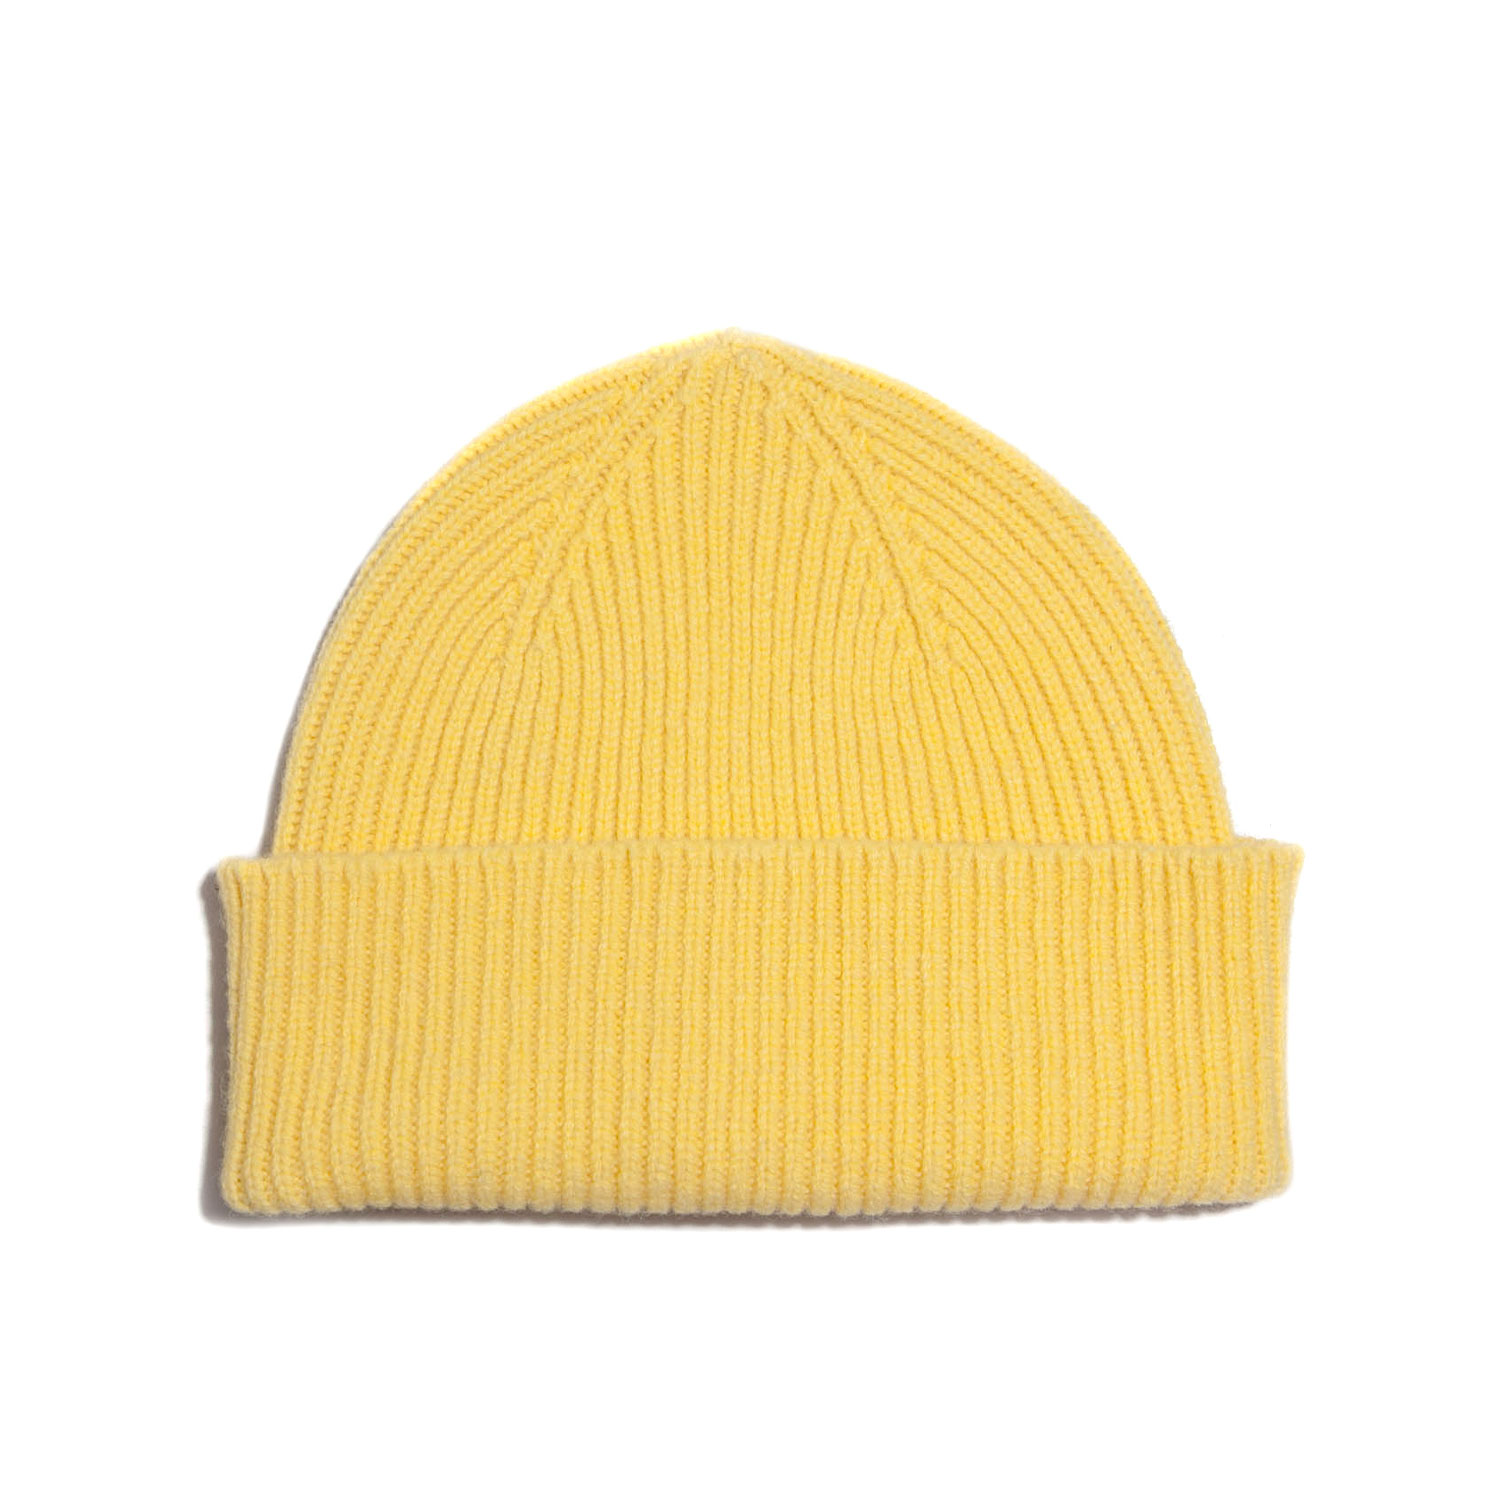 Clyde Hat - Daffodil